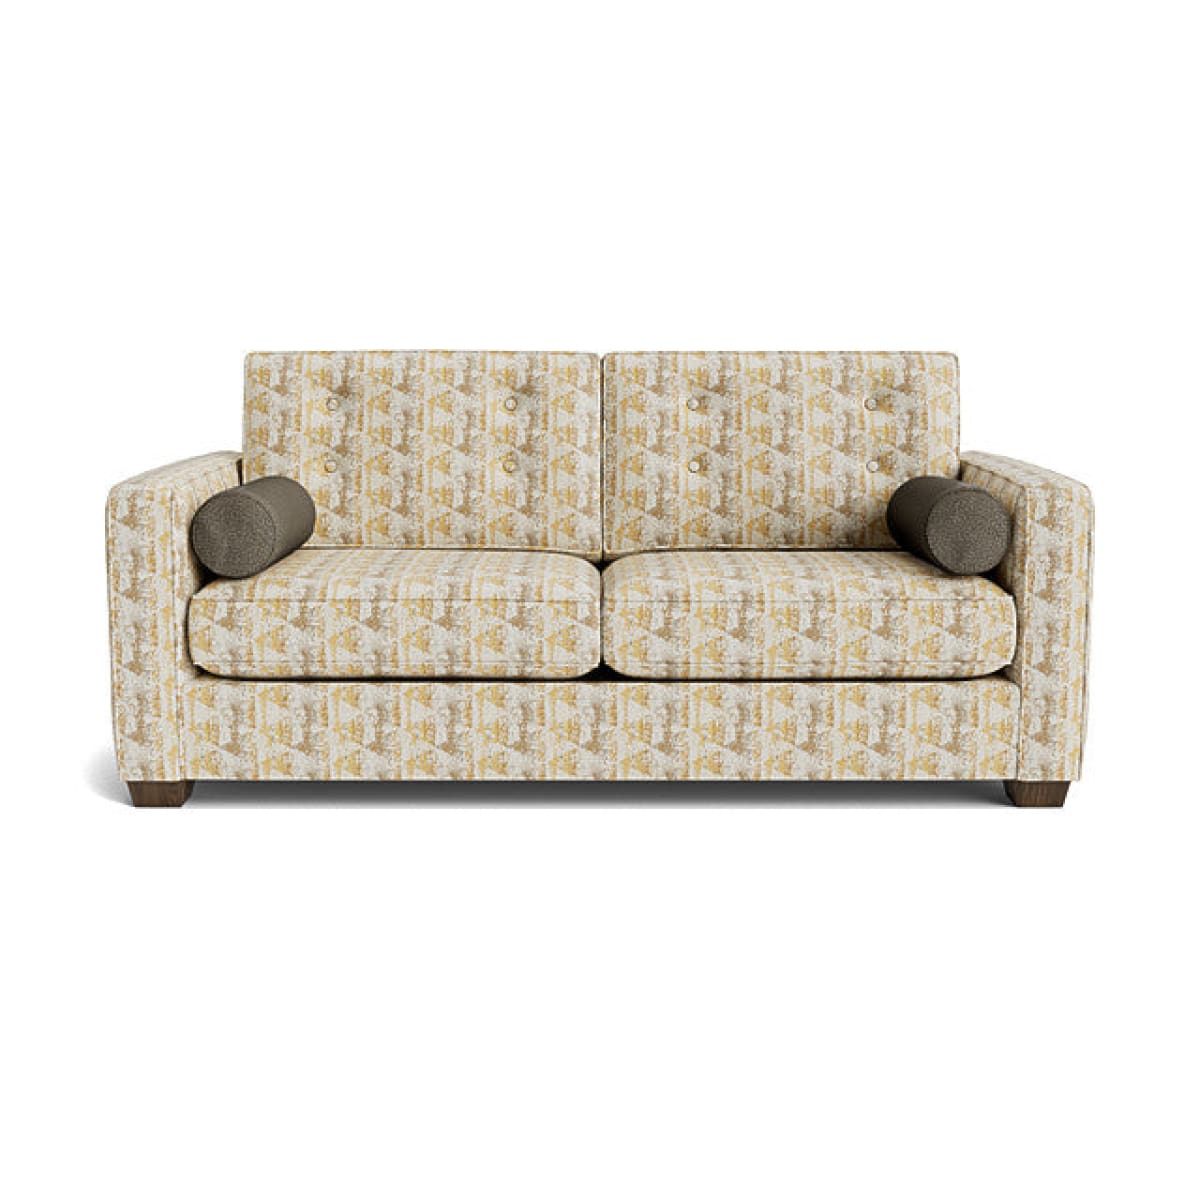 Haro Sofa - Sectional - Voyager Buttercup